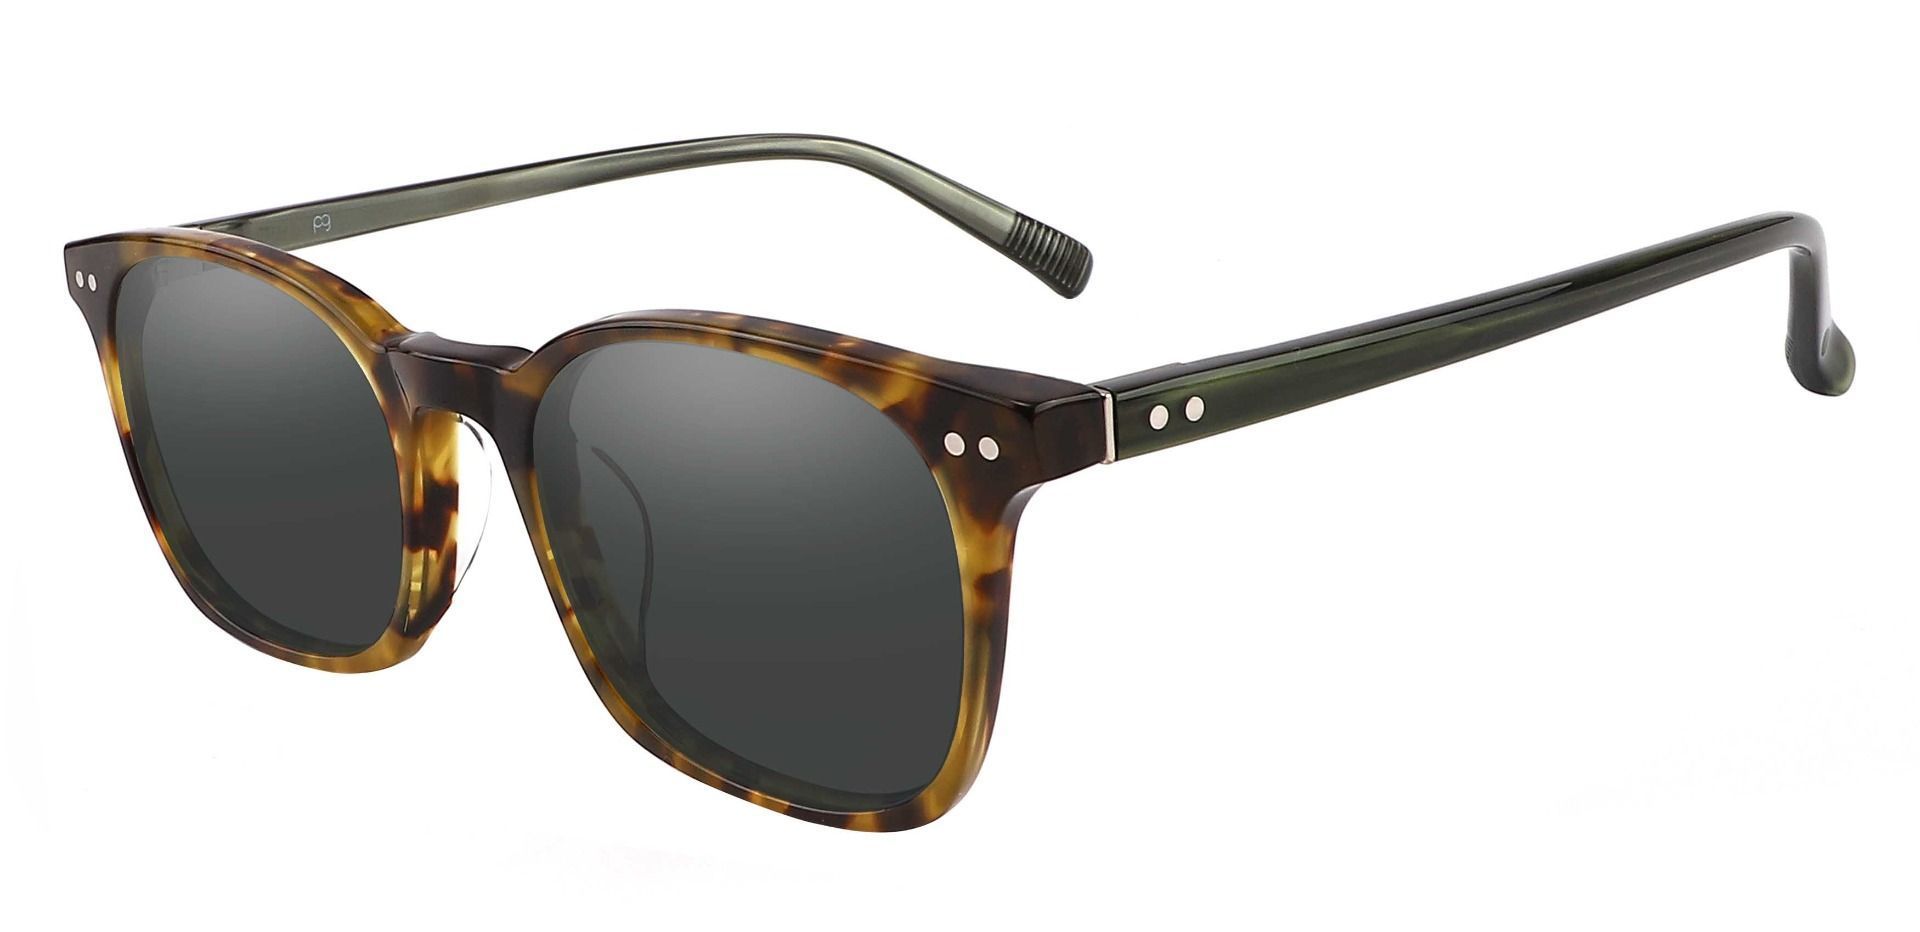 Alonzo Square Lined Bifocal Sunglasses - Tortoise Frame With Gray Lenses